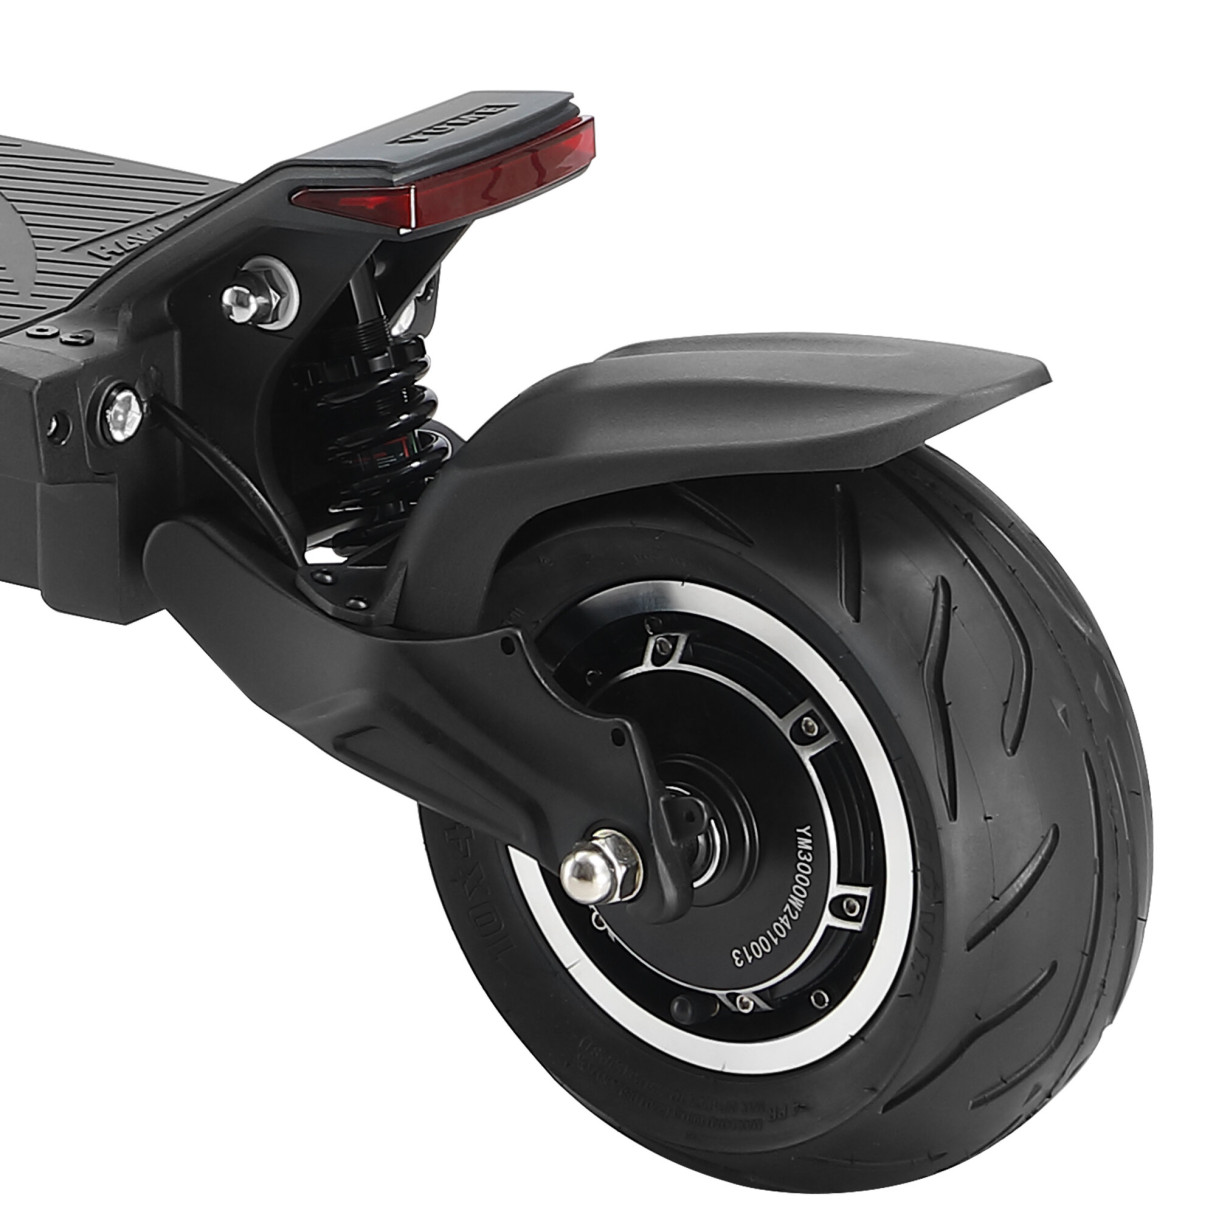 [EU DIRECT] YUME HAWK PRO Electric Scooter 60V 30AH Battery 3000W*2 Motor 10inch Tires 96KM Max Mileage 126KG Max Load Folding E-Scooter